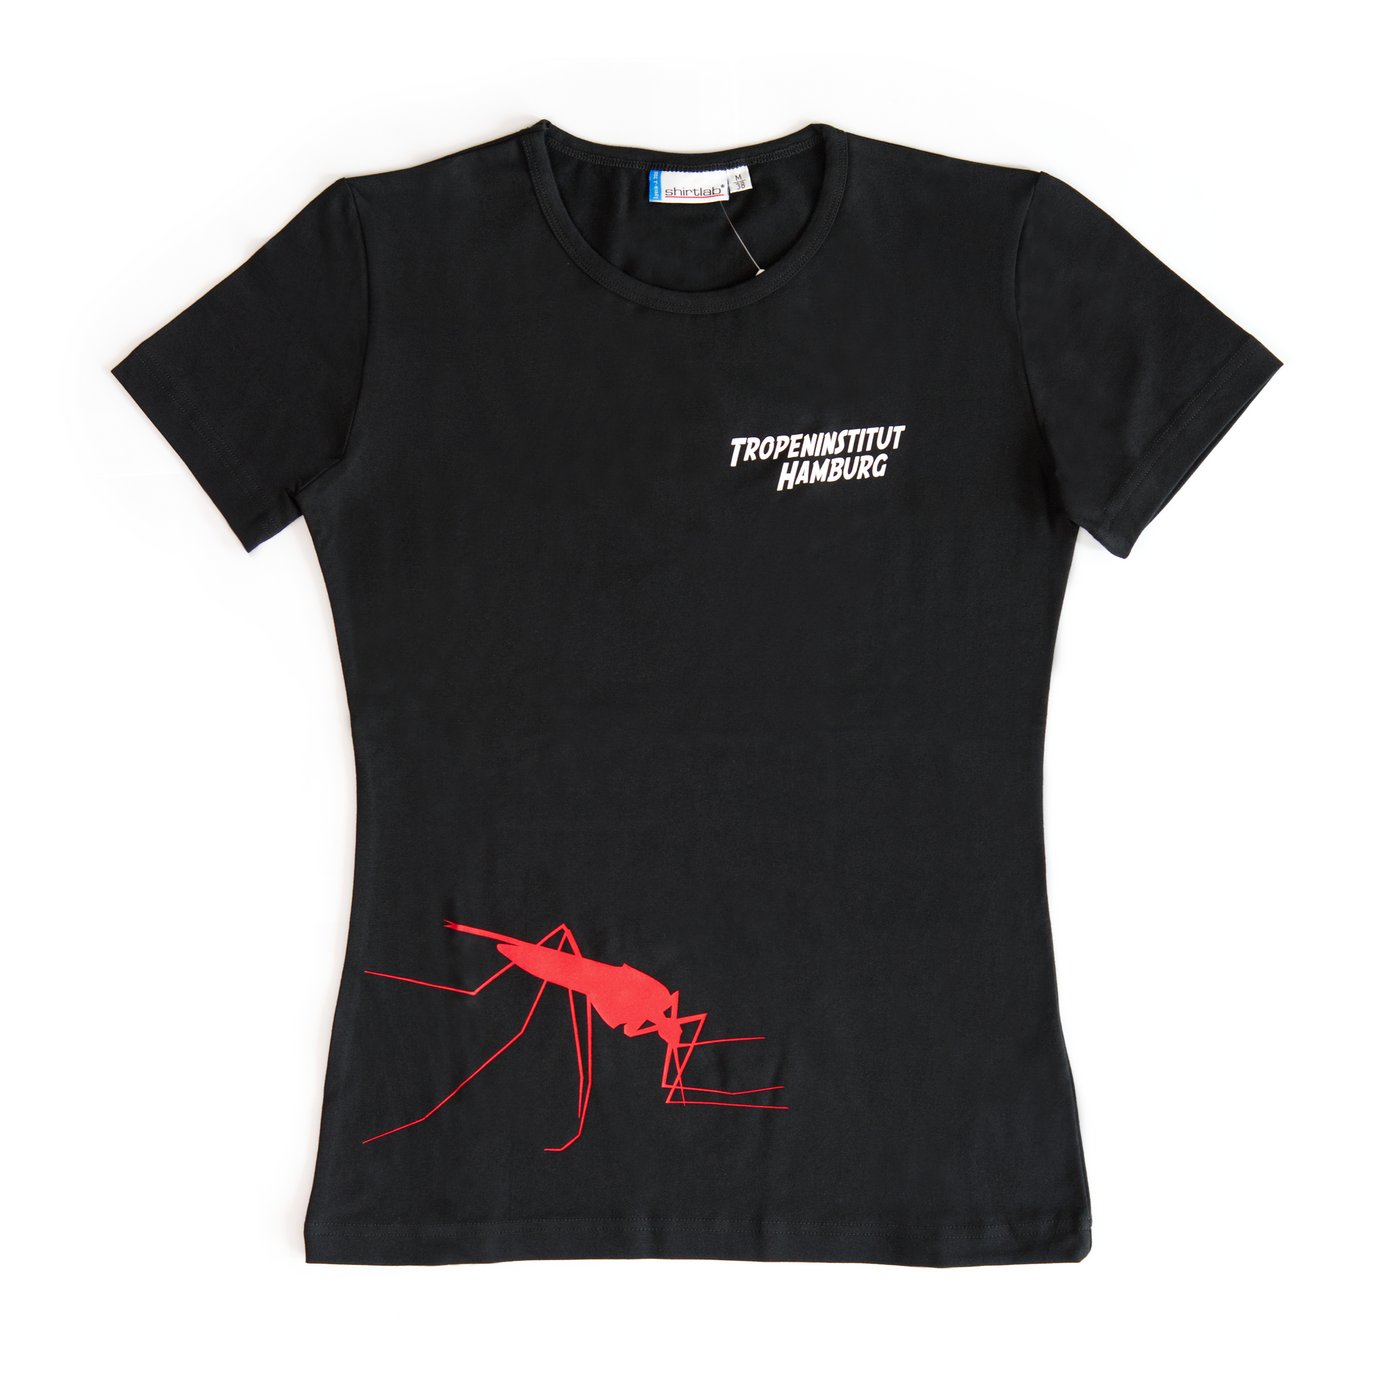 The image shows a black T-shirt with a red mosquito print.